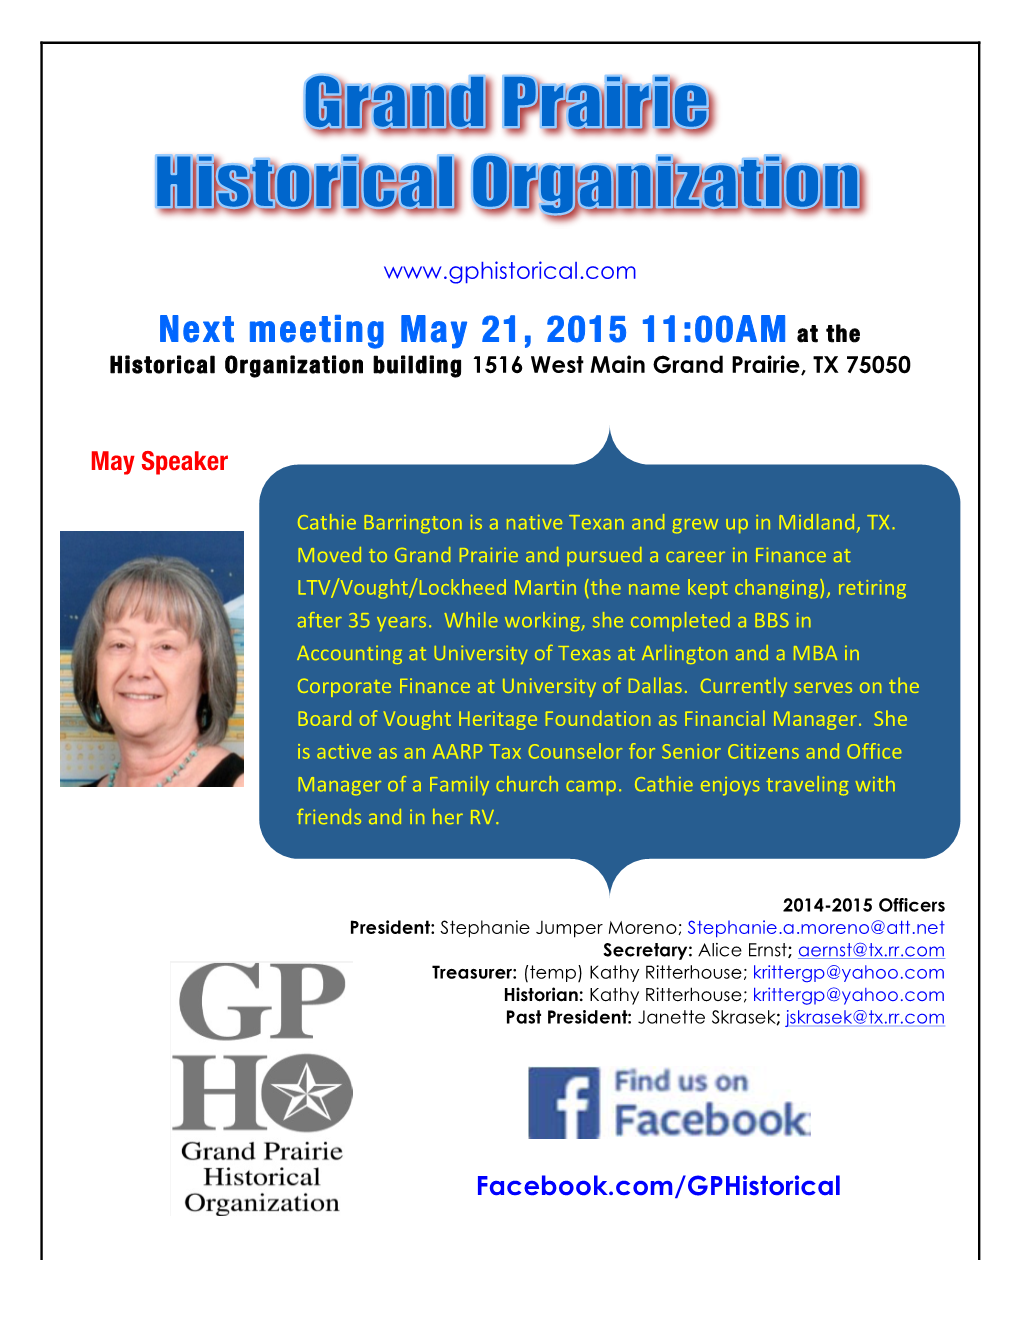 Next Meeting May 21, 2015 11:00AM at the Historical Organization Building 1516 West Main Grand Prairie, TX 75050